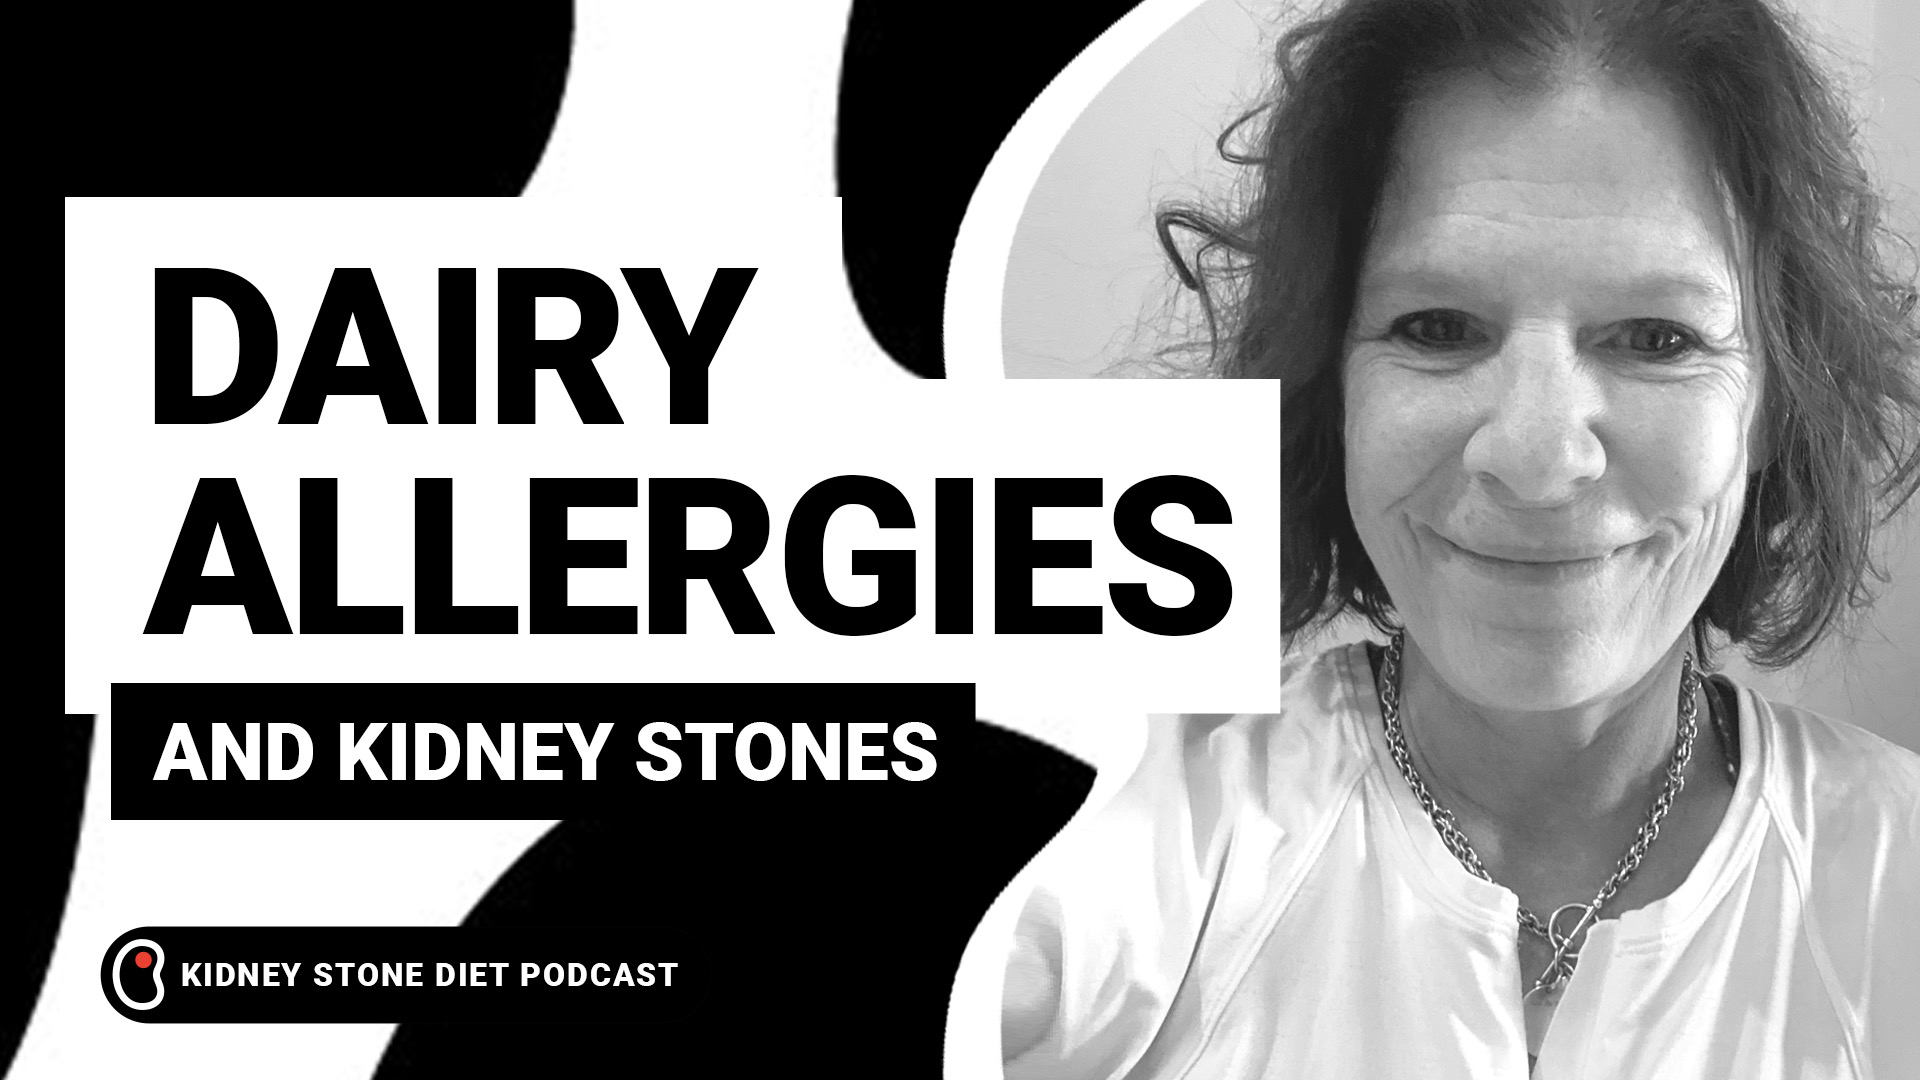 Dairy allergies and kidney stones